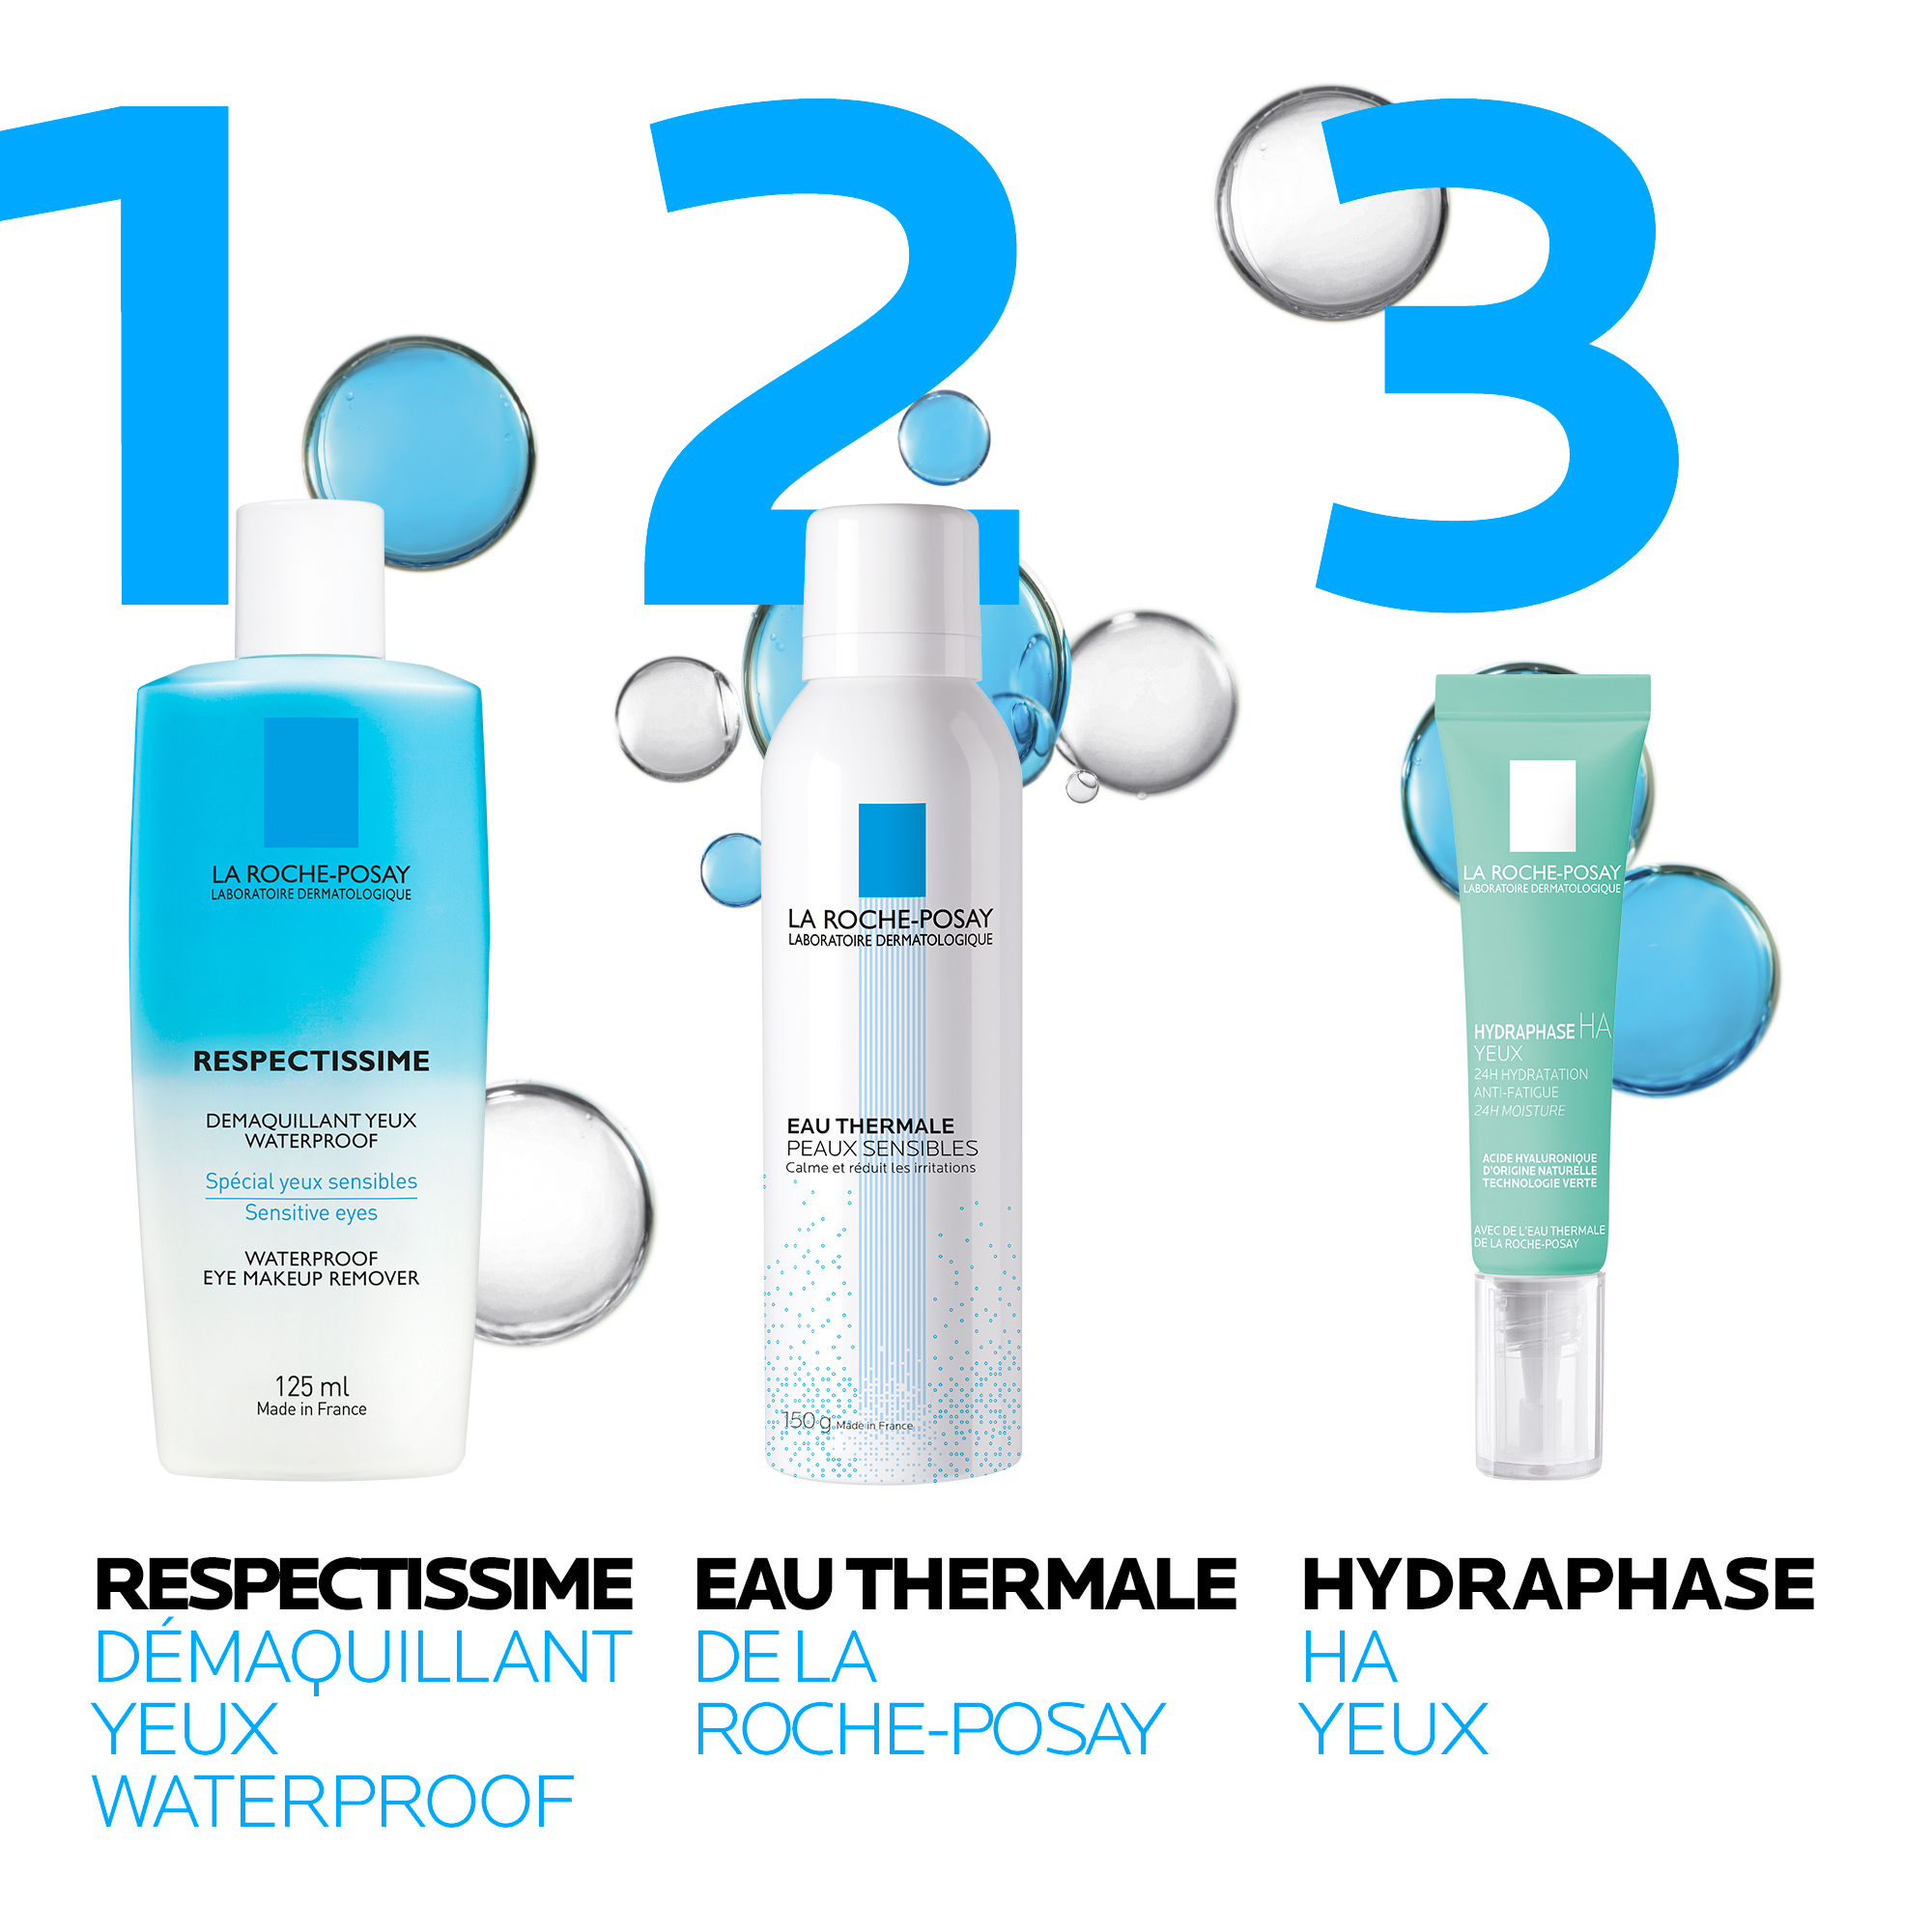 RESPECTISSIME DÉMAQUILLANT YEUX WATERPROOF : DÉMAQUILLANT YEUX WATERPROOF  par La Roche-Posay